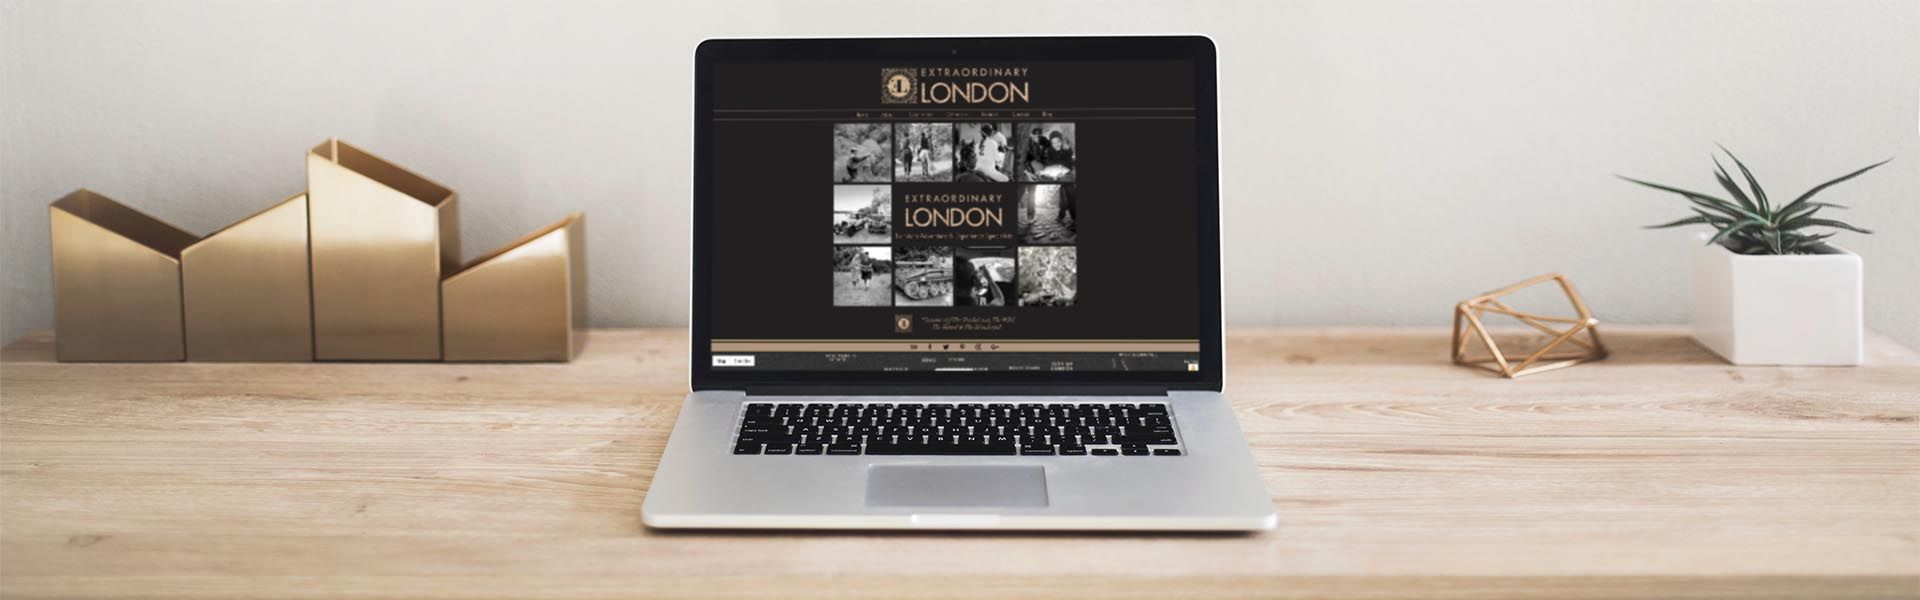 a laptop is open to a website for the extraordinary london